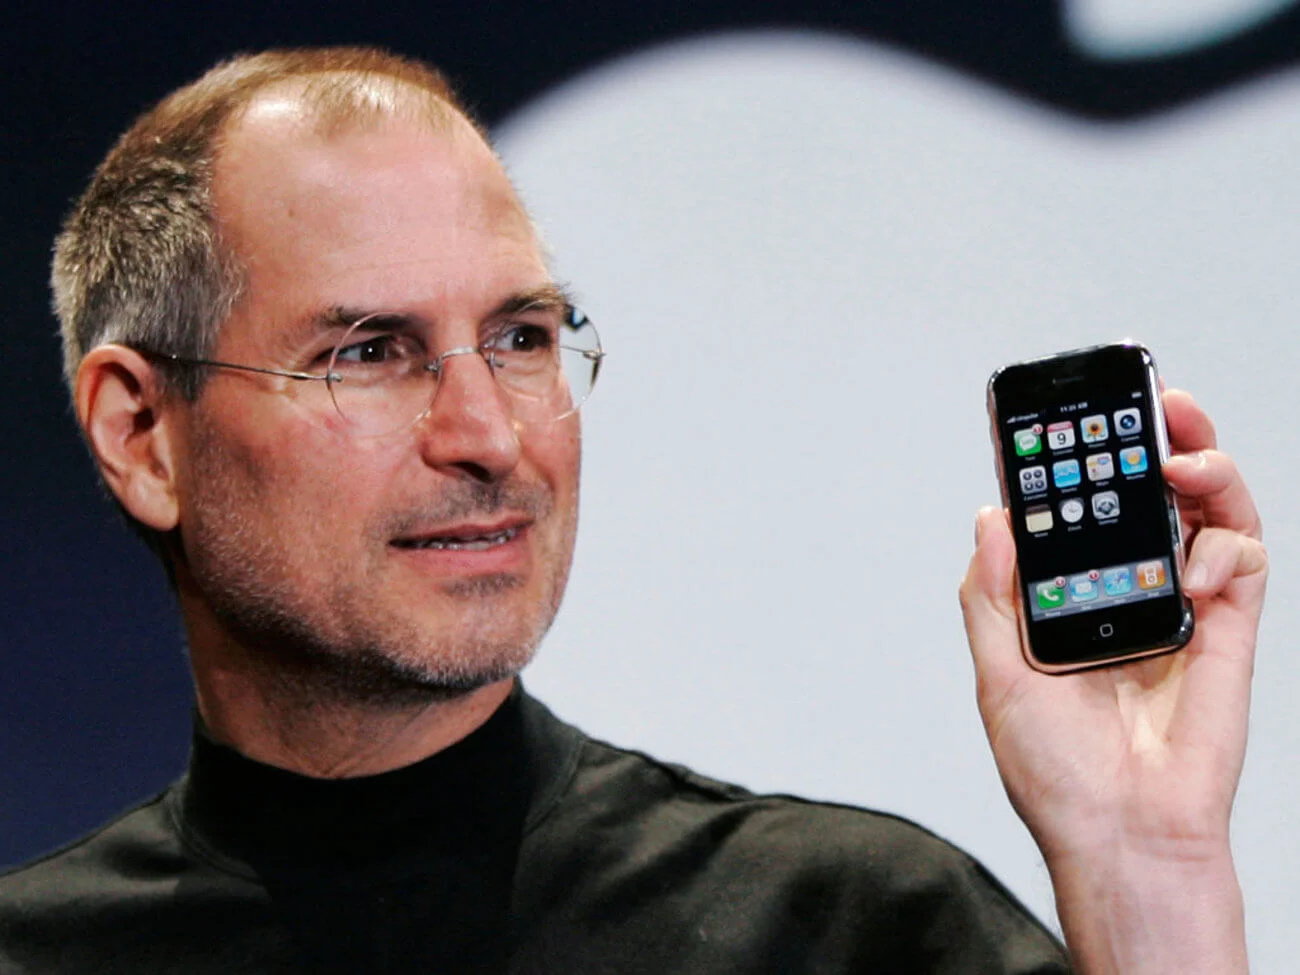 Exactly 15 years ago, Steve Jobs introduced the first Apple iPhone: remember what it was